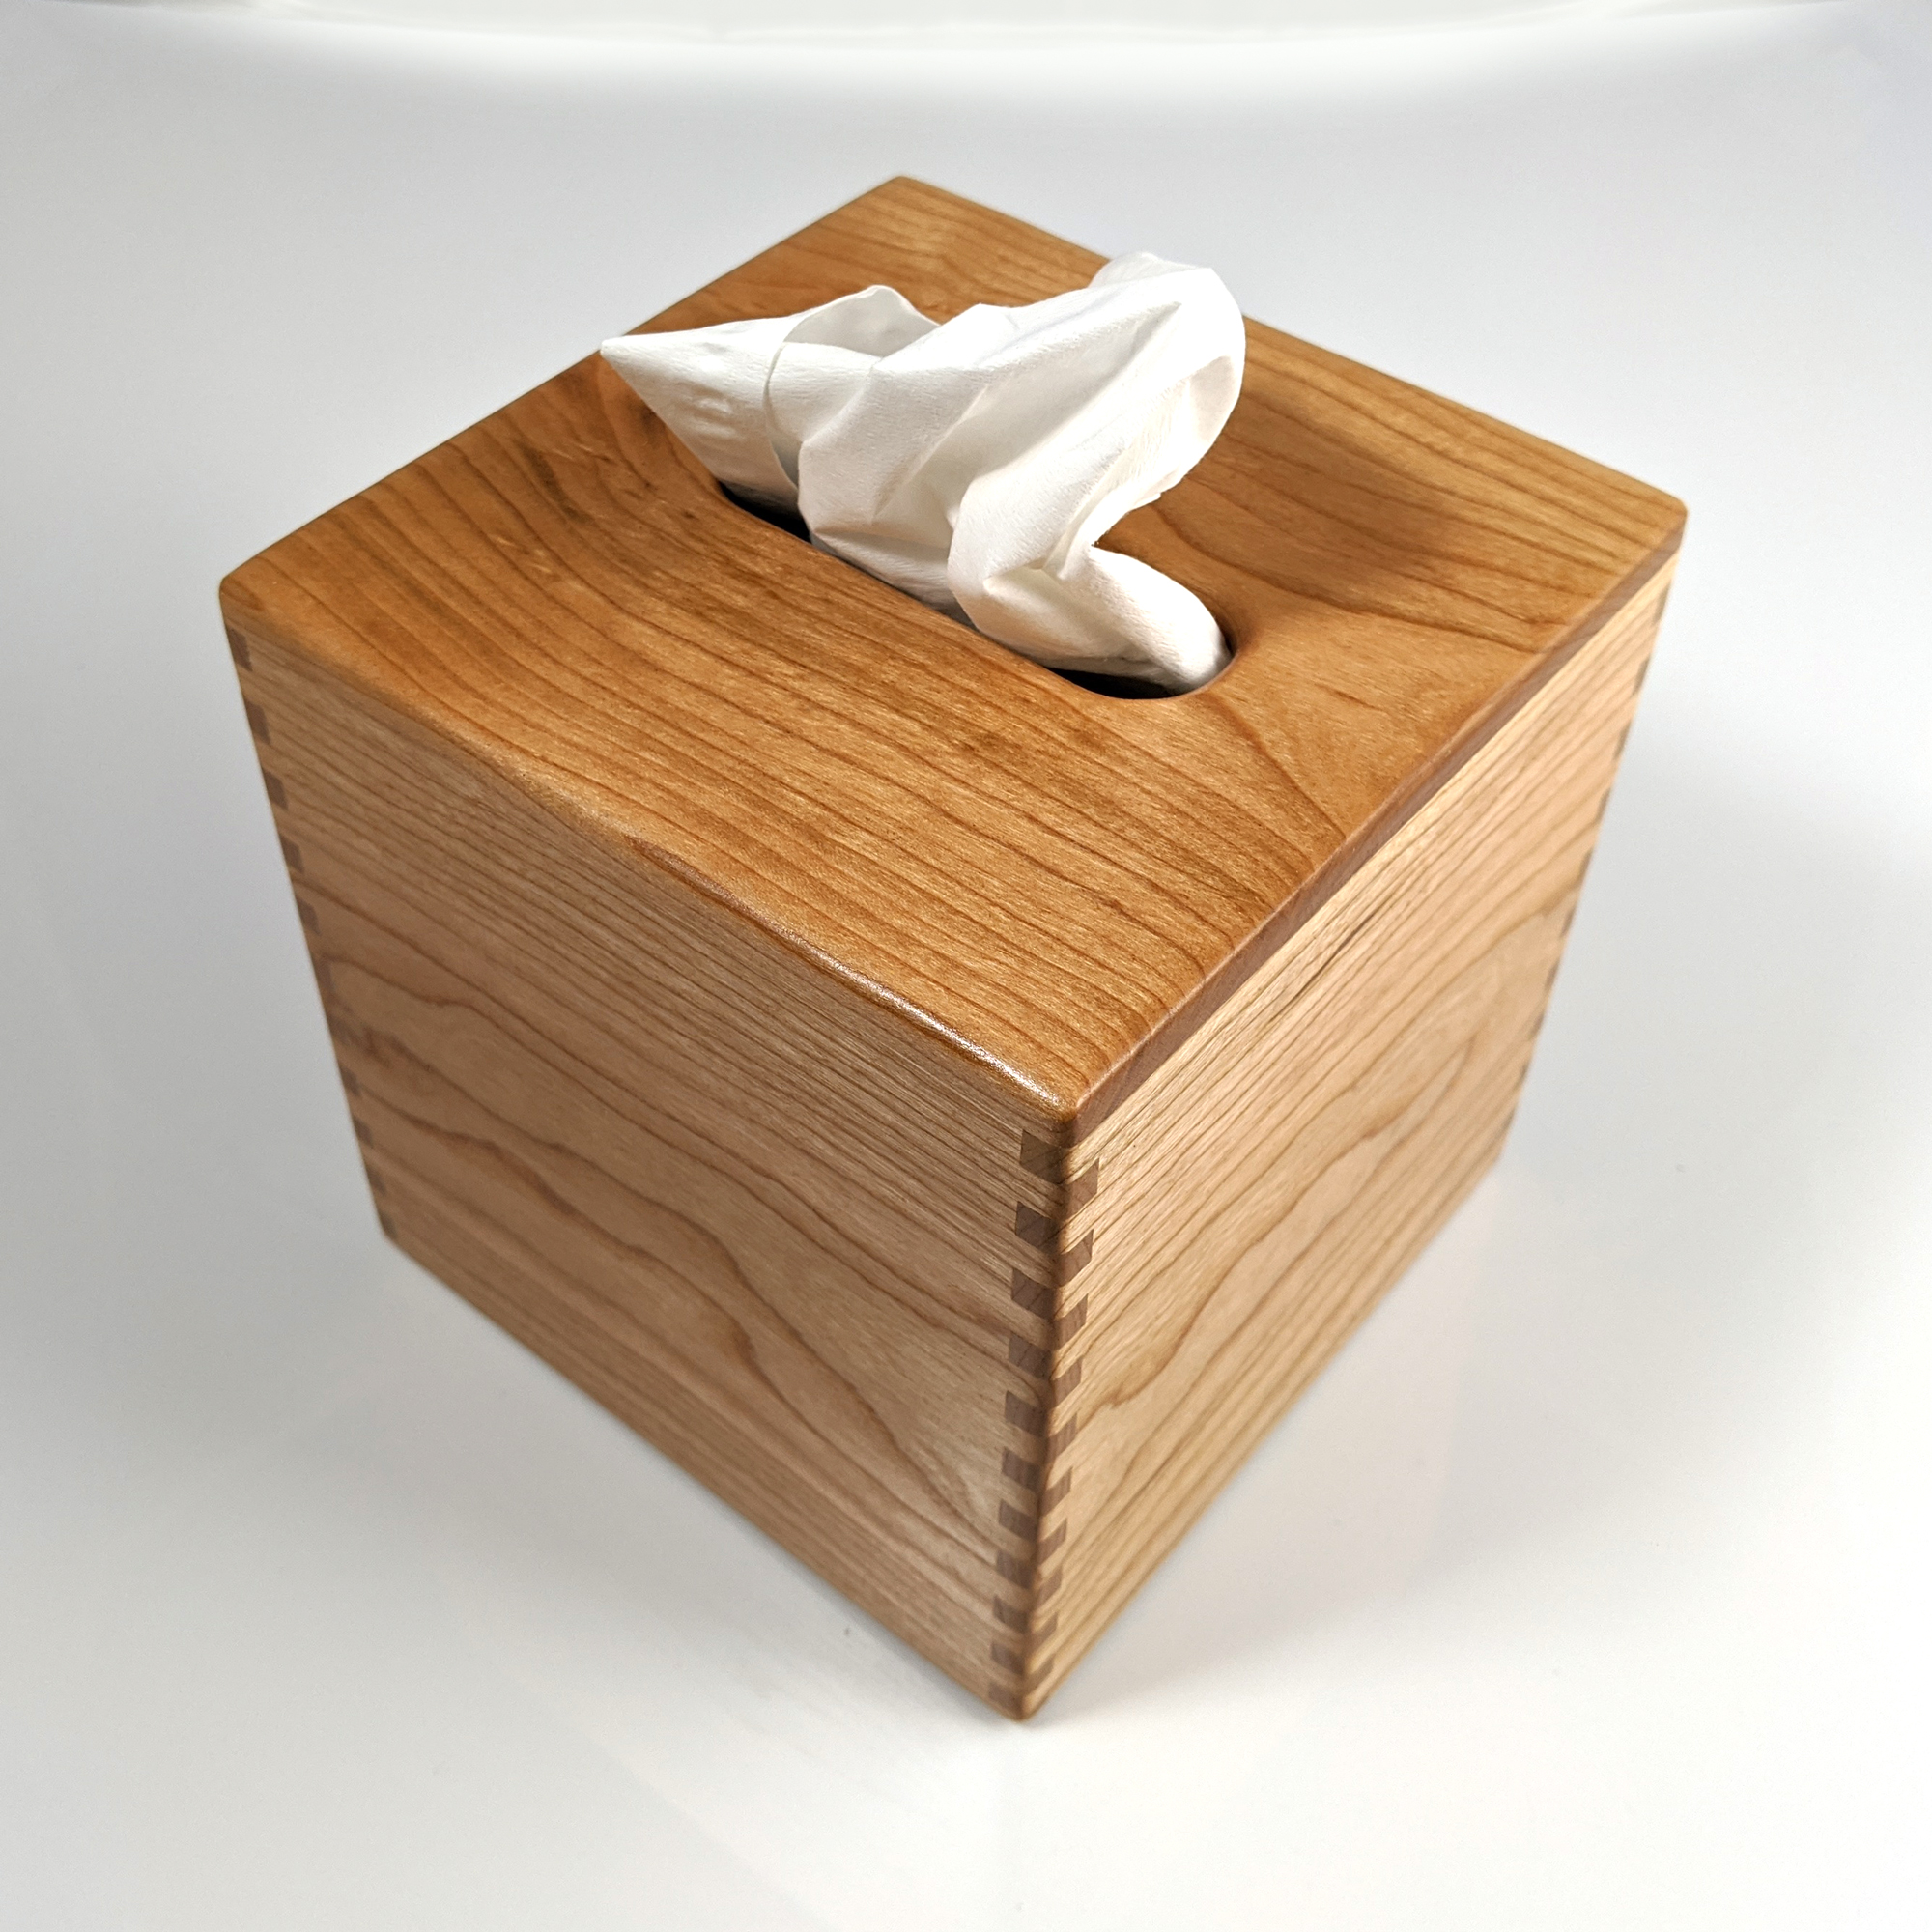 Solid Cherry Handmade Tissue Box Cover Holder - Boutique Square Cube Style  - Box Jointed Sides